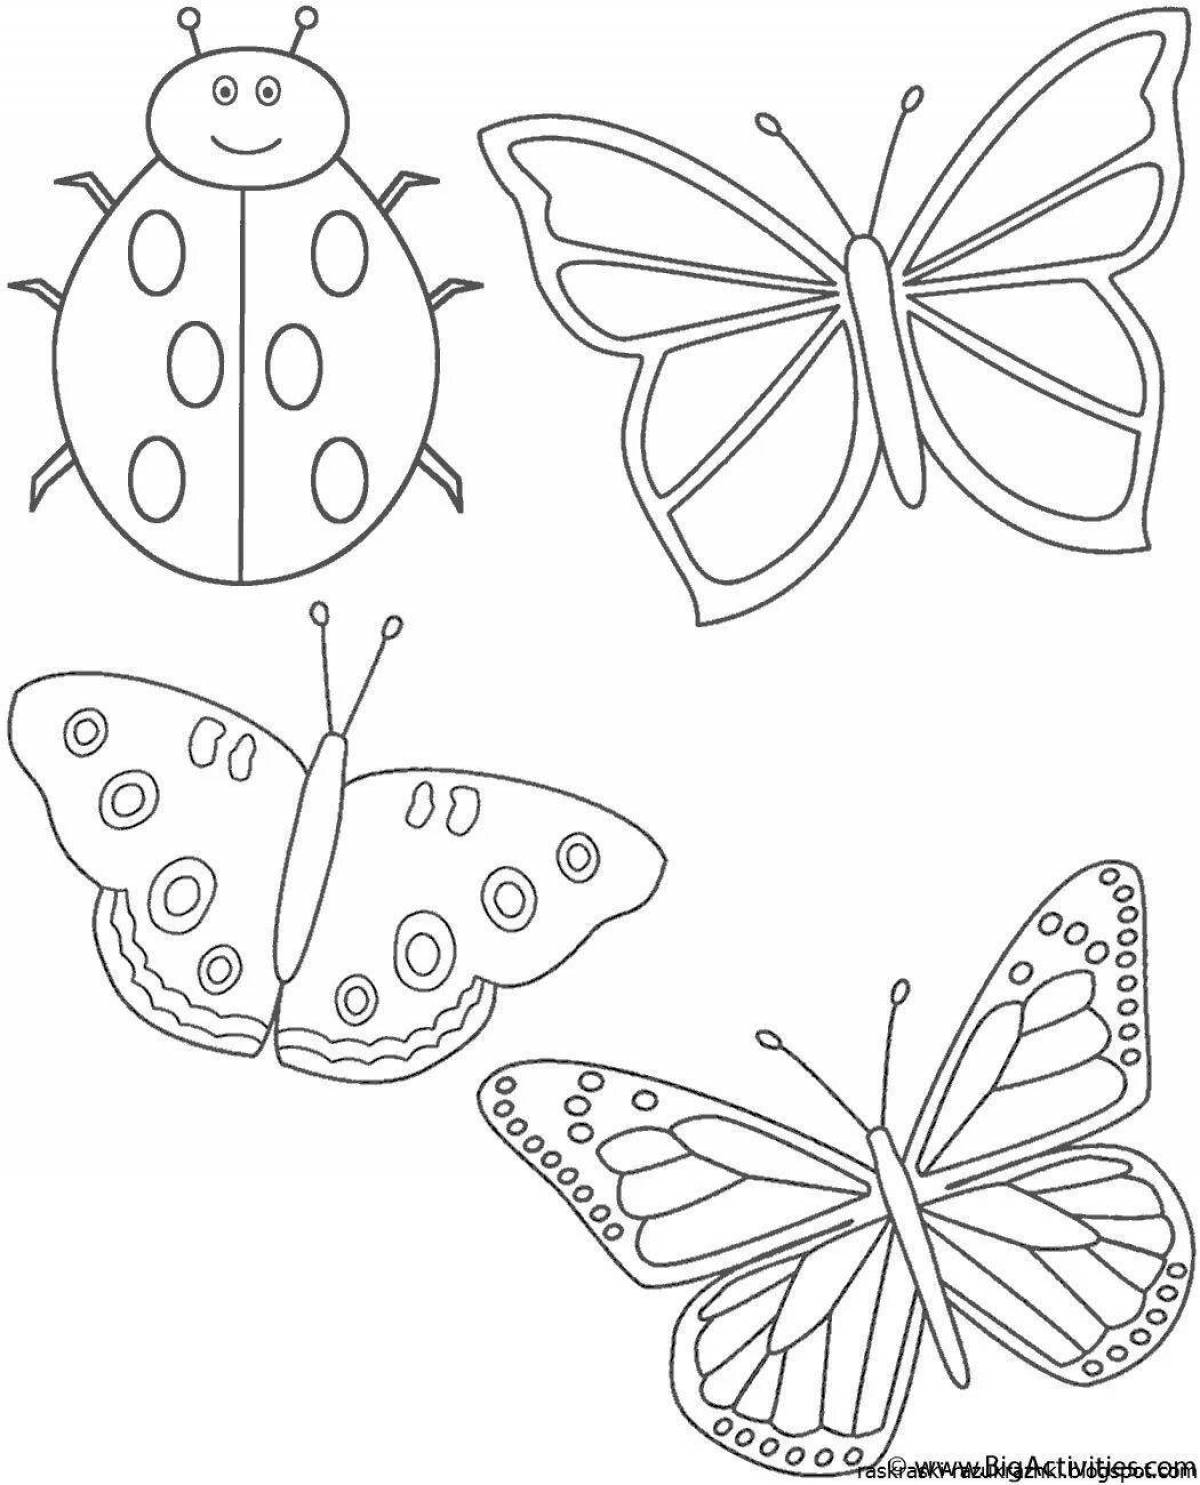 Color-imagination cutting coloring page